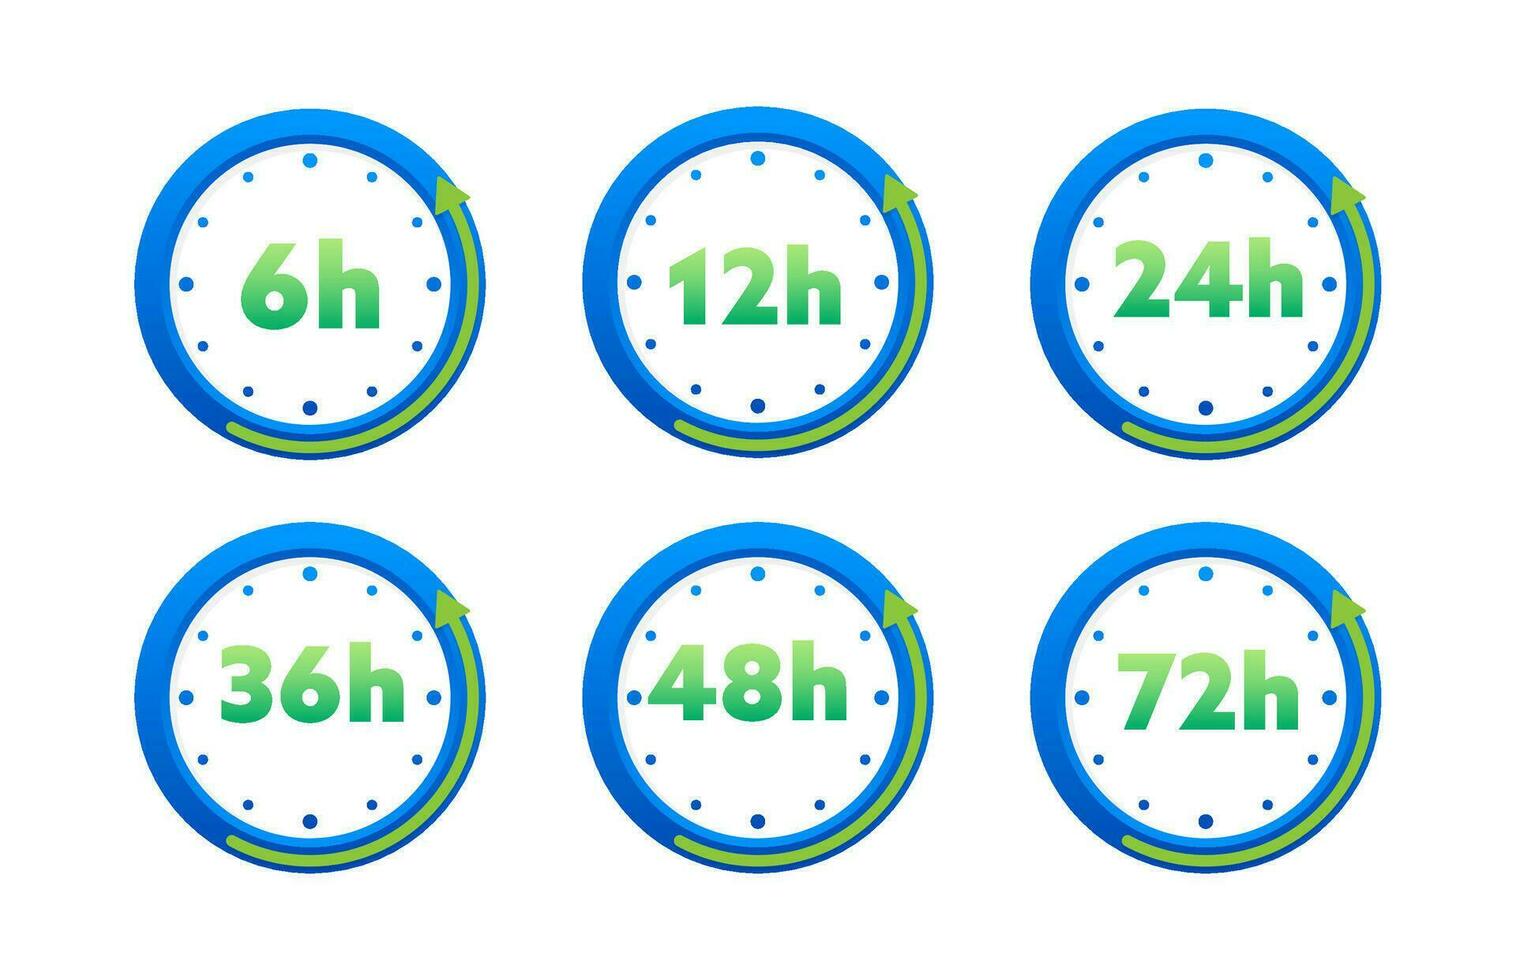 12, 24, 36, 48 and 72 hours clock arrow. Working and Delivery service effect time icons. Order execution. Vector stock illustration